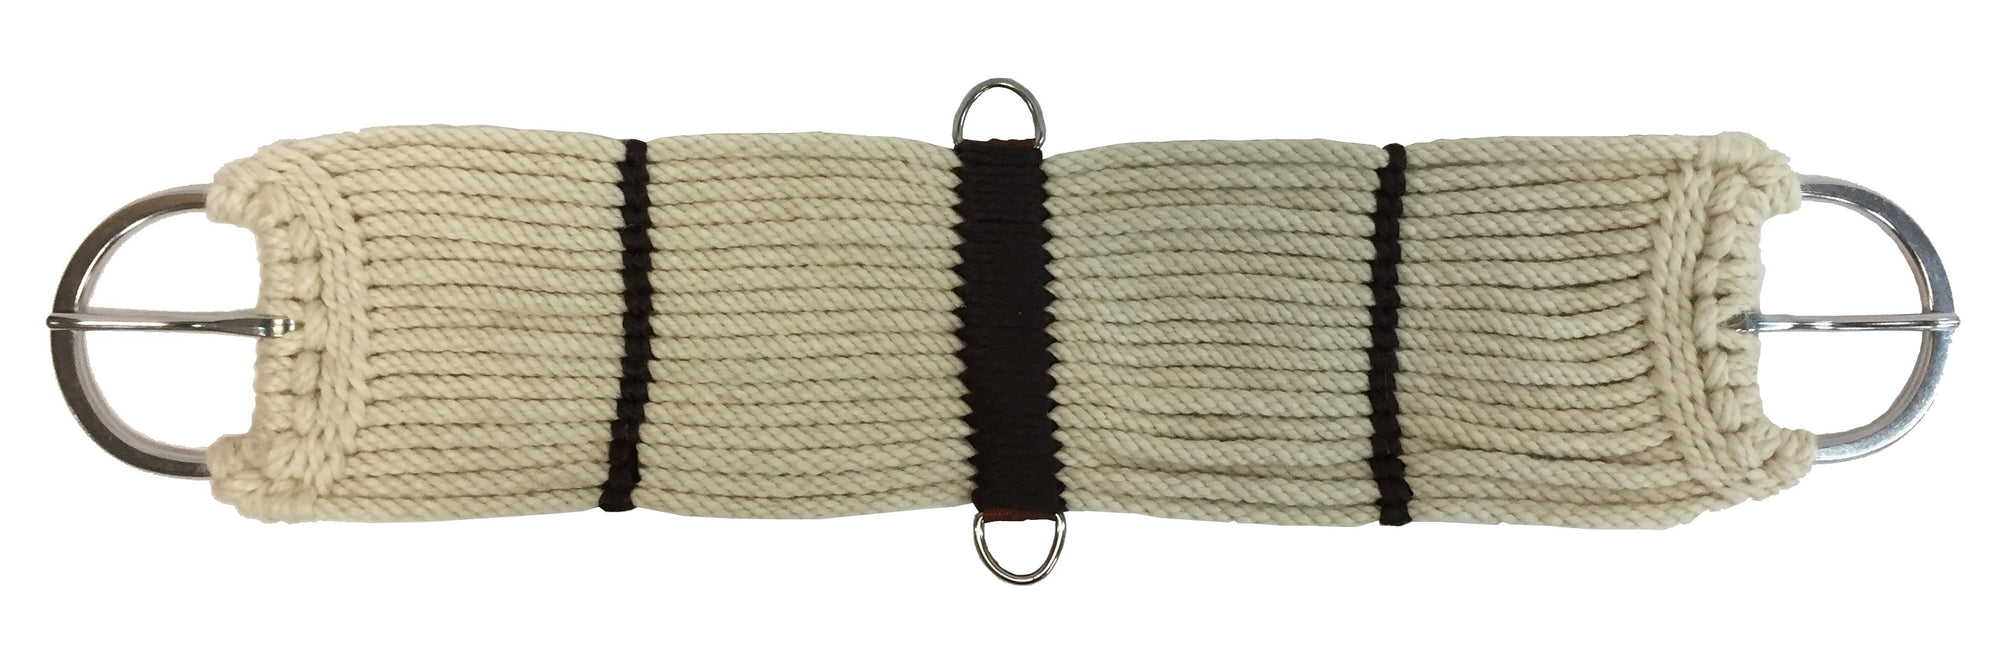 Girth Mpb Cord 17 Strand With Stainless Buckle & Centre D